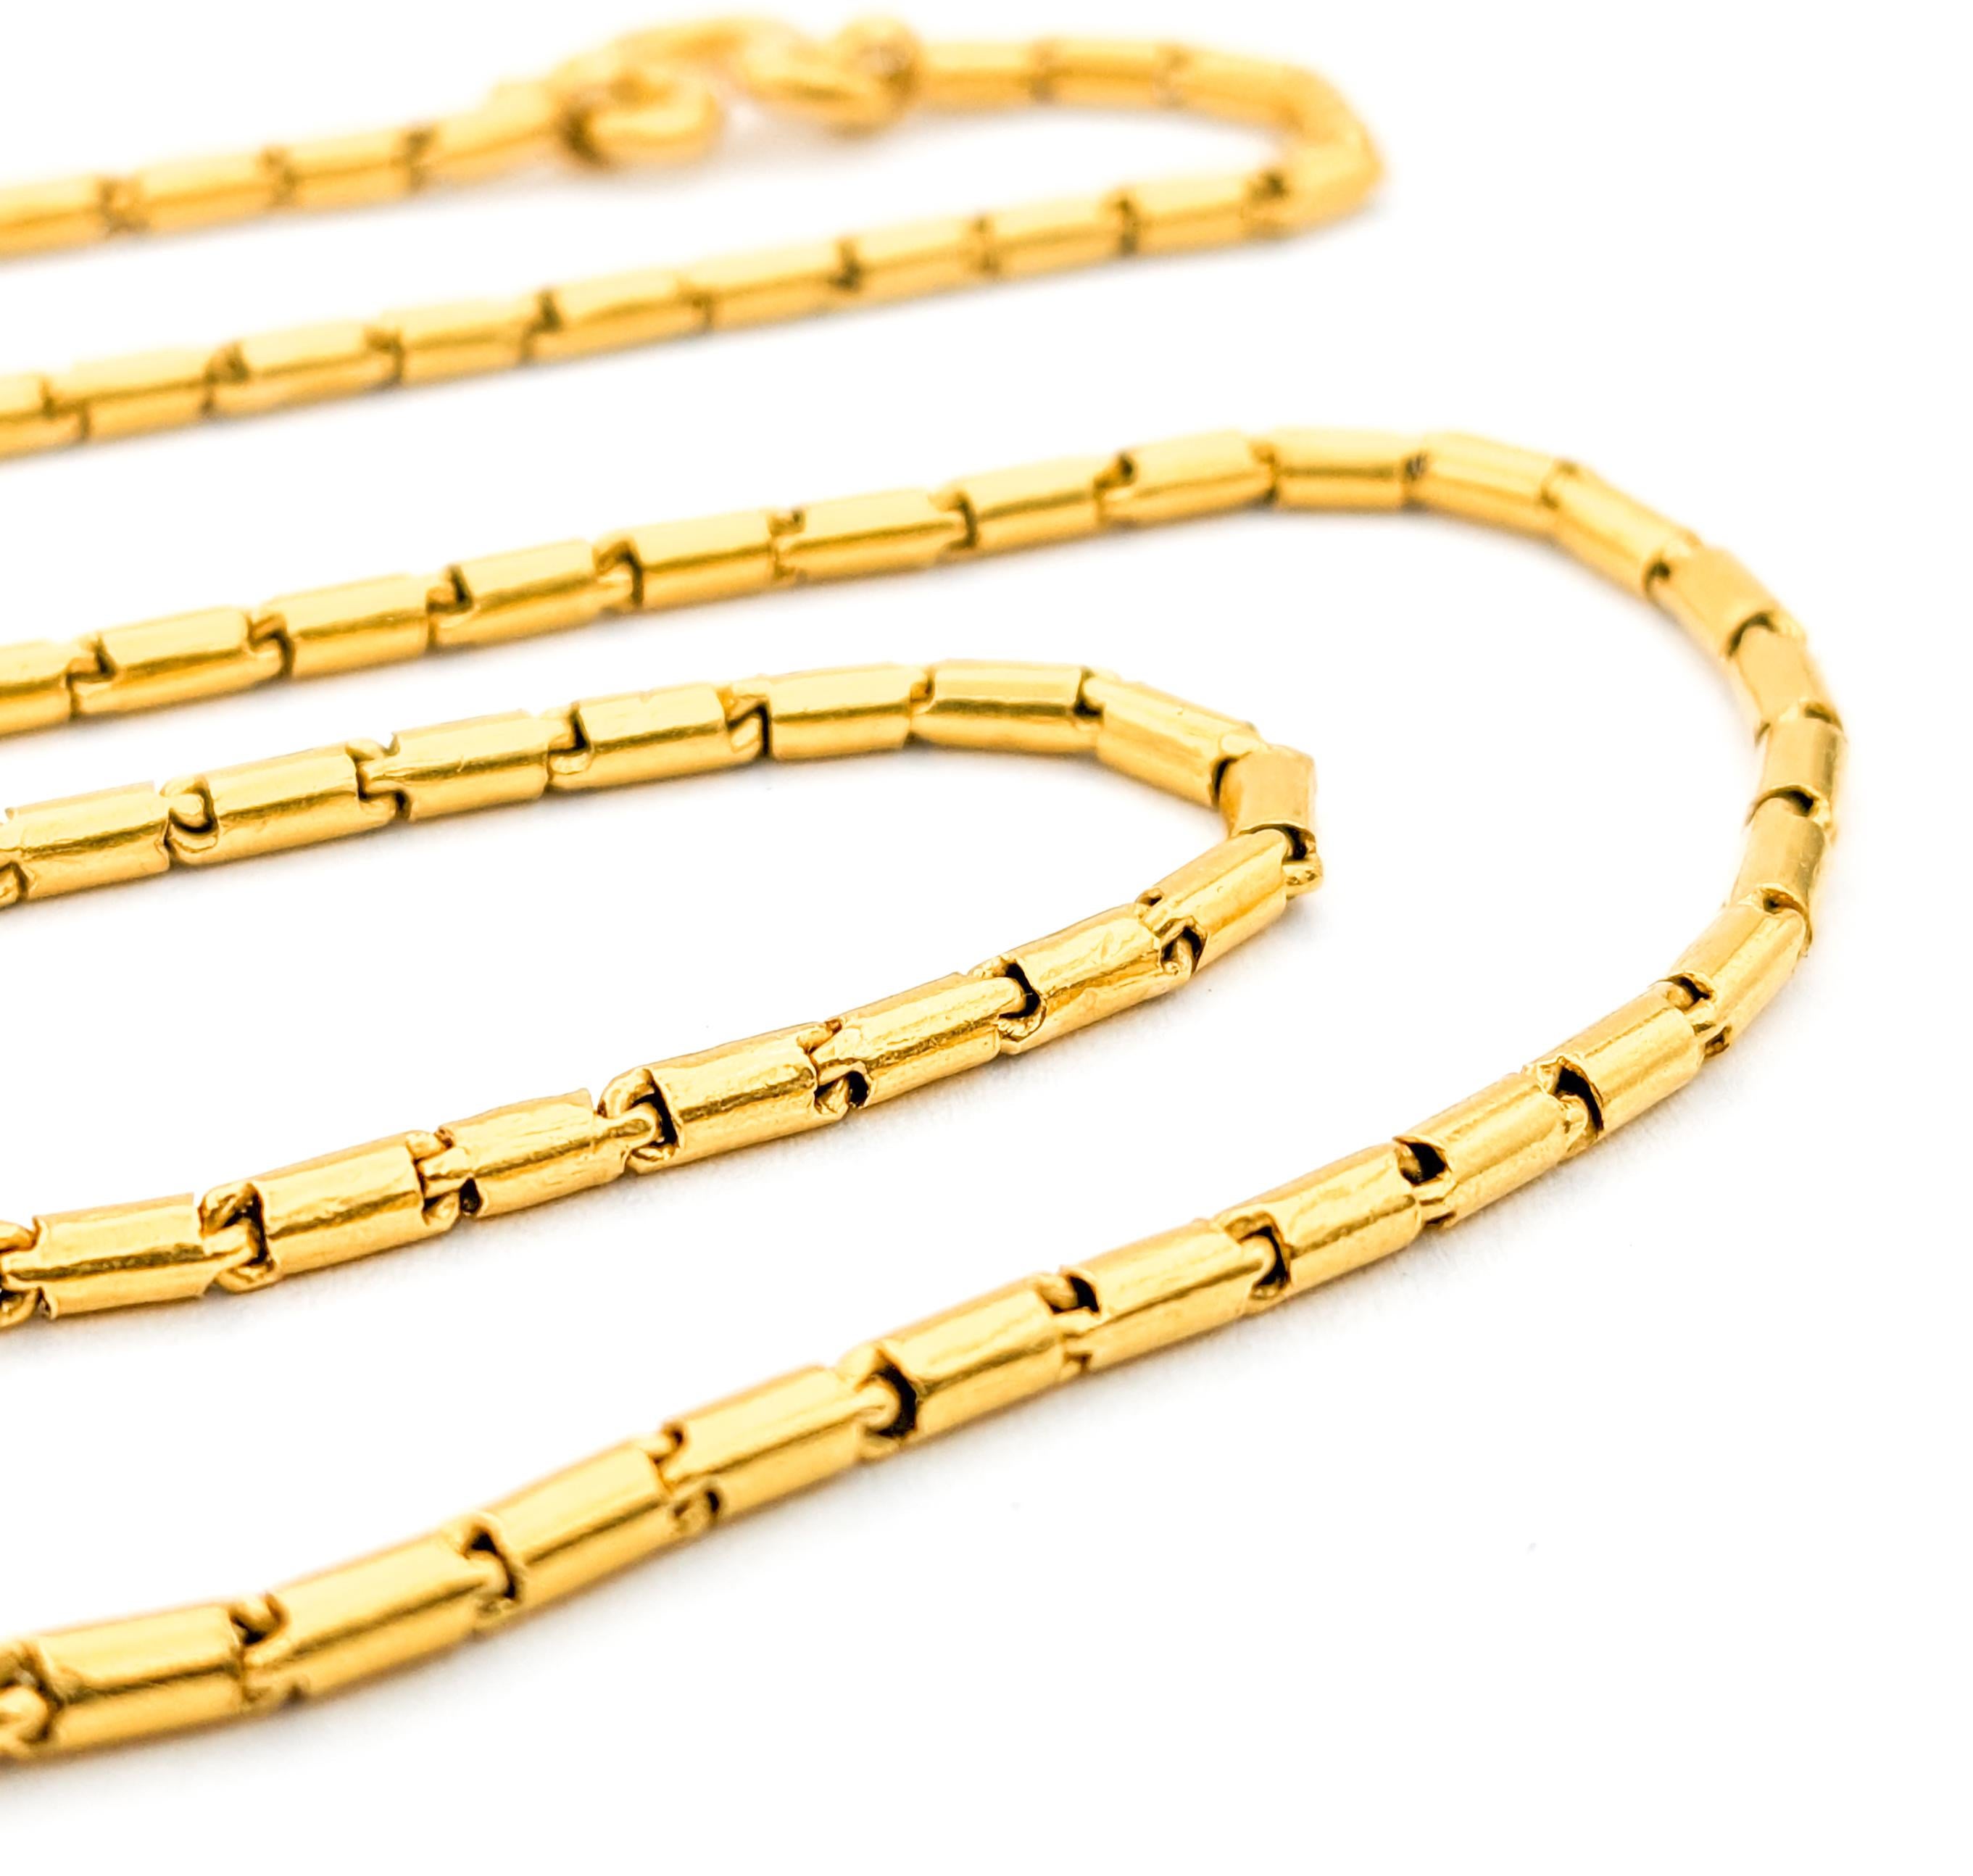 Vintage Barrel Link Chain Necklace in 21k Yellow Gold

Introducing our exquisite chain necklace, meticulously crafted in luxurious 21-karat yellow gold. This stunning piece showcases a unique barrel link design, with slender 2.1mm links that add a